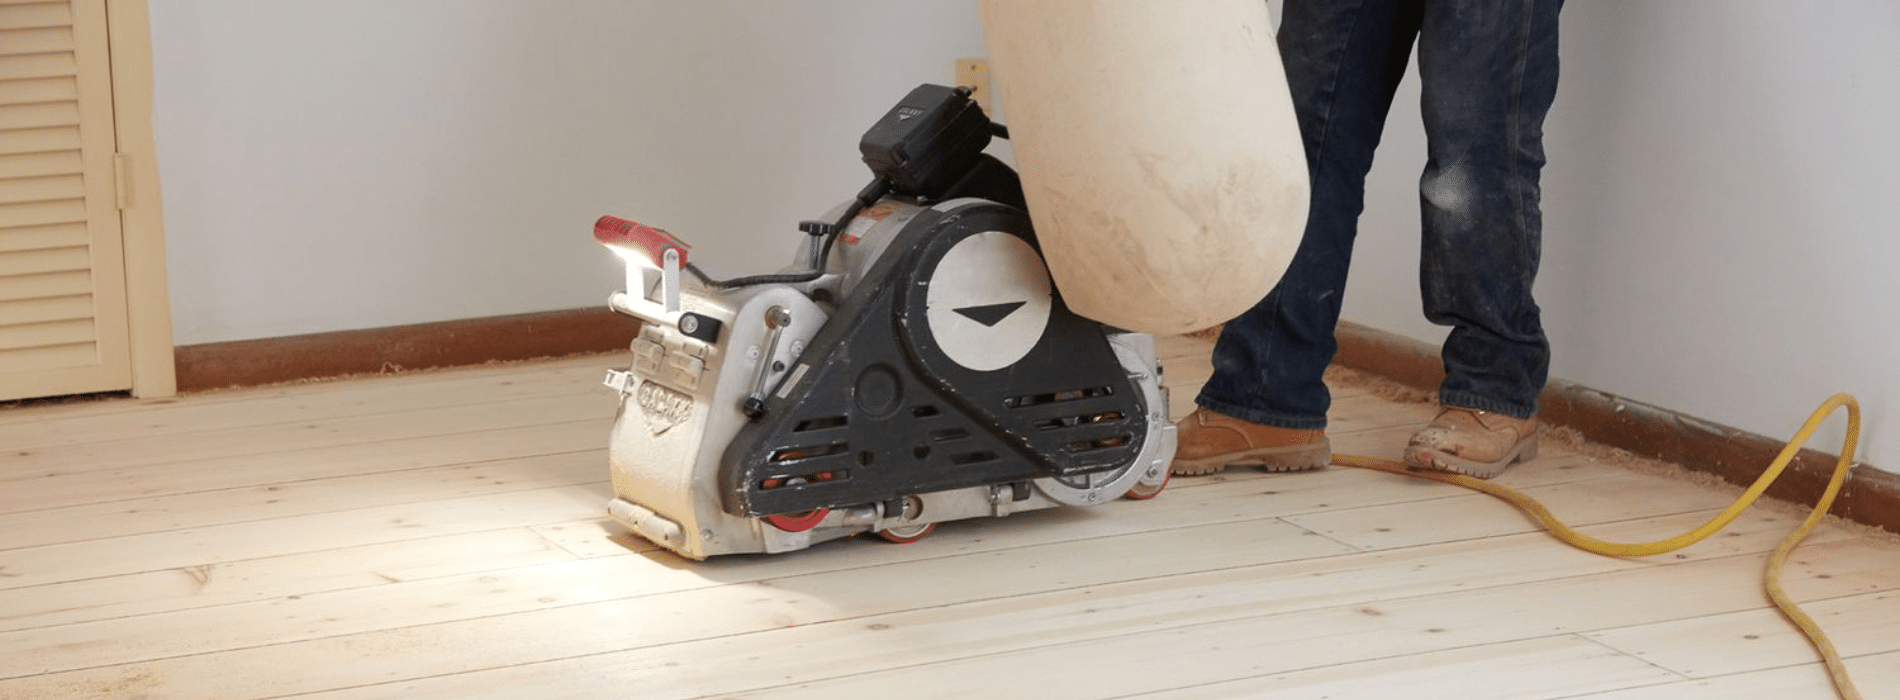 Mr Sander® skilfully restoring a parquet floor in Worcester Park, KT4, using a Bona belt sander with a power output of 2200W, 220V voltage, 60Hz frequency, and size of 200x750 mm. This process is complemented by a HEPA filter dust extraction system, ensuring a clean and highly efficient operation.